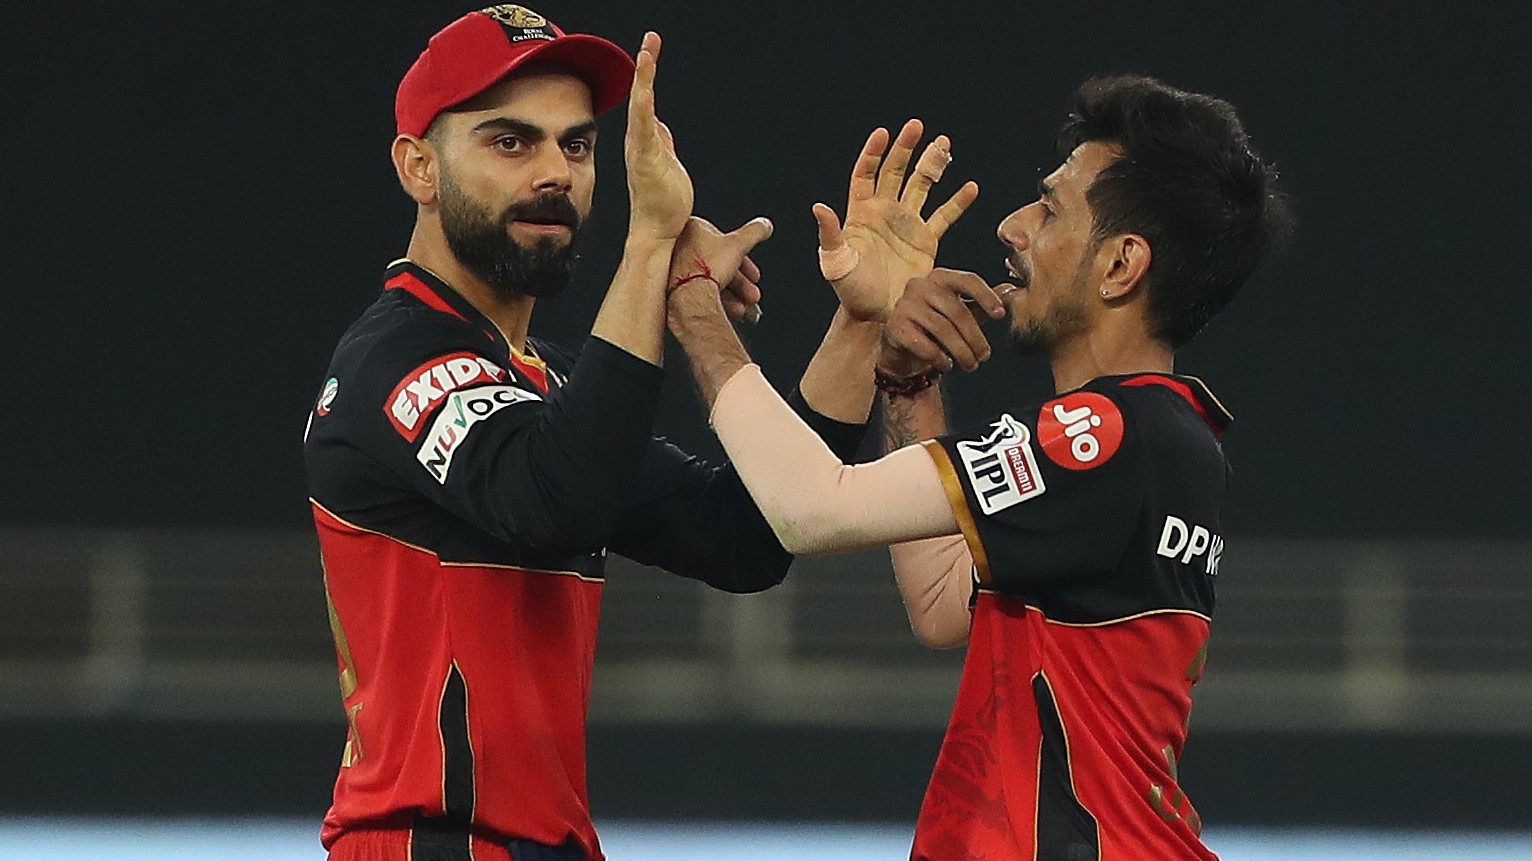 IPL 2020: Kohli lauds Chahal after RCB’s win over SRH; says he can get purchase on any surface